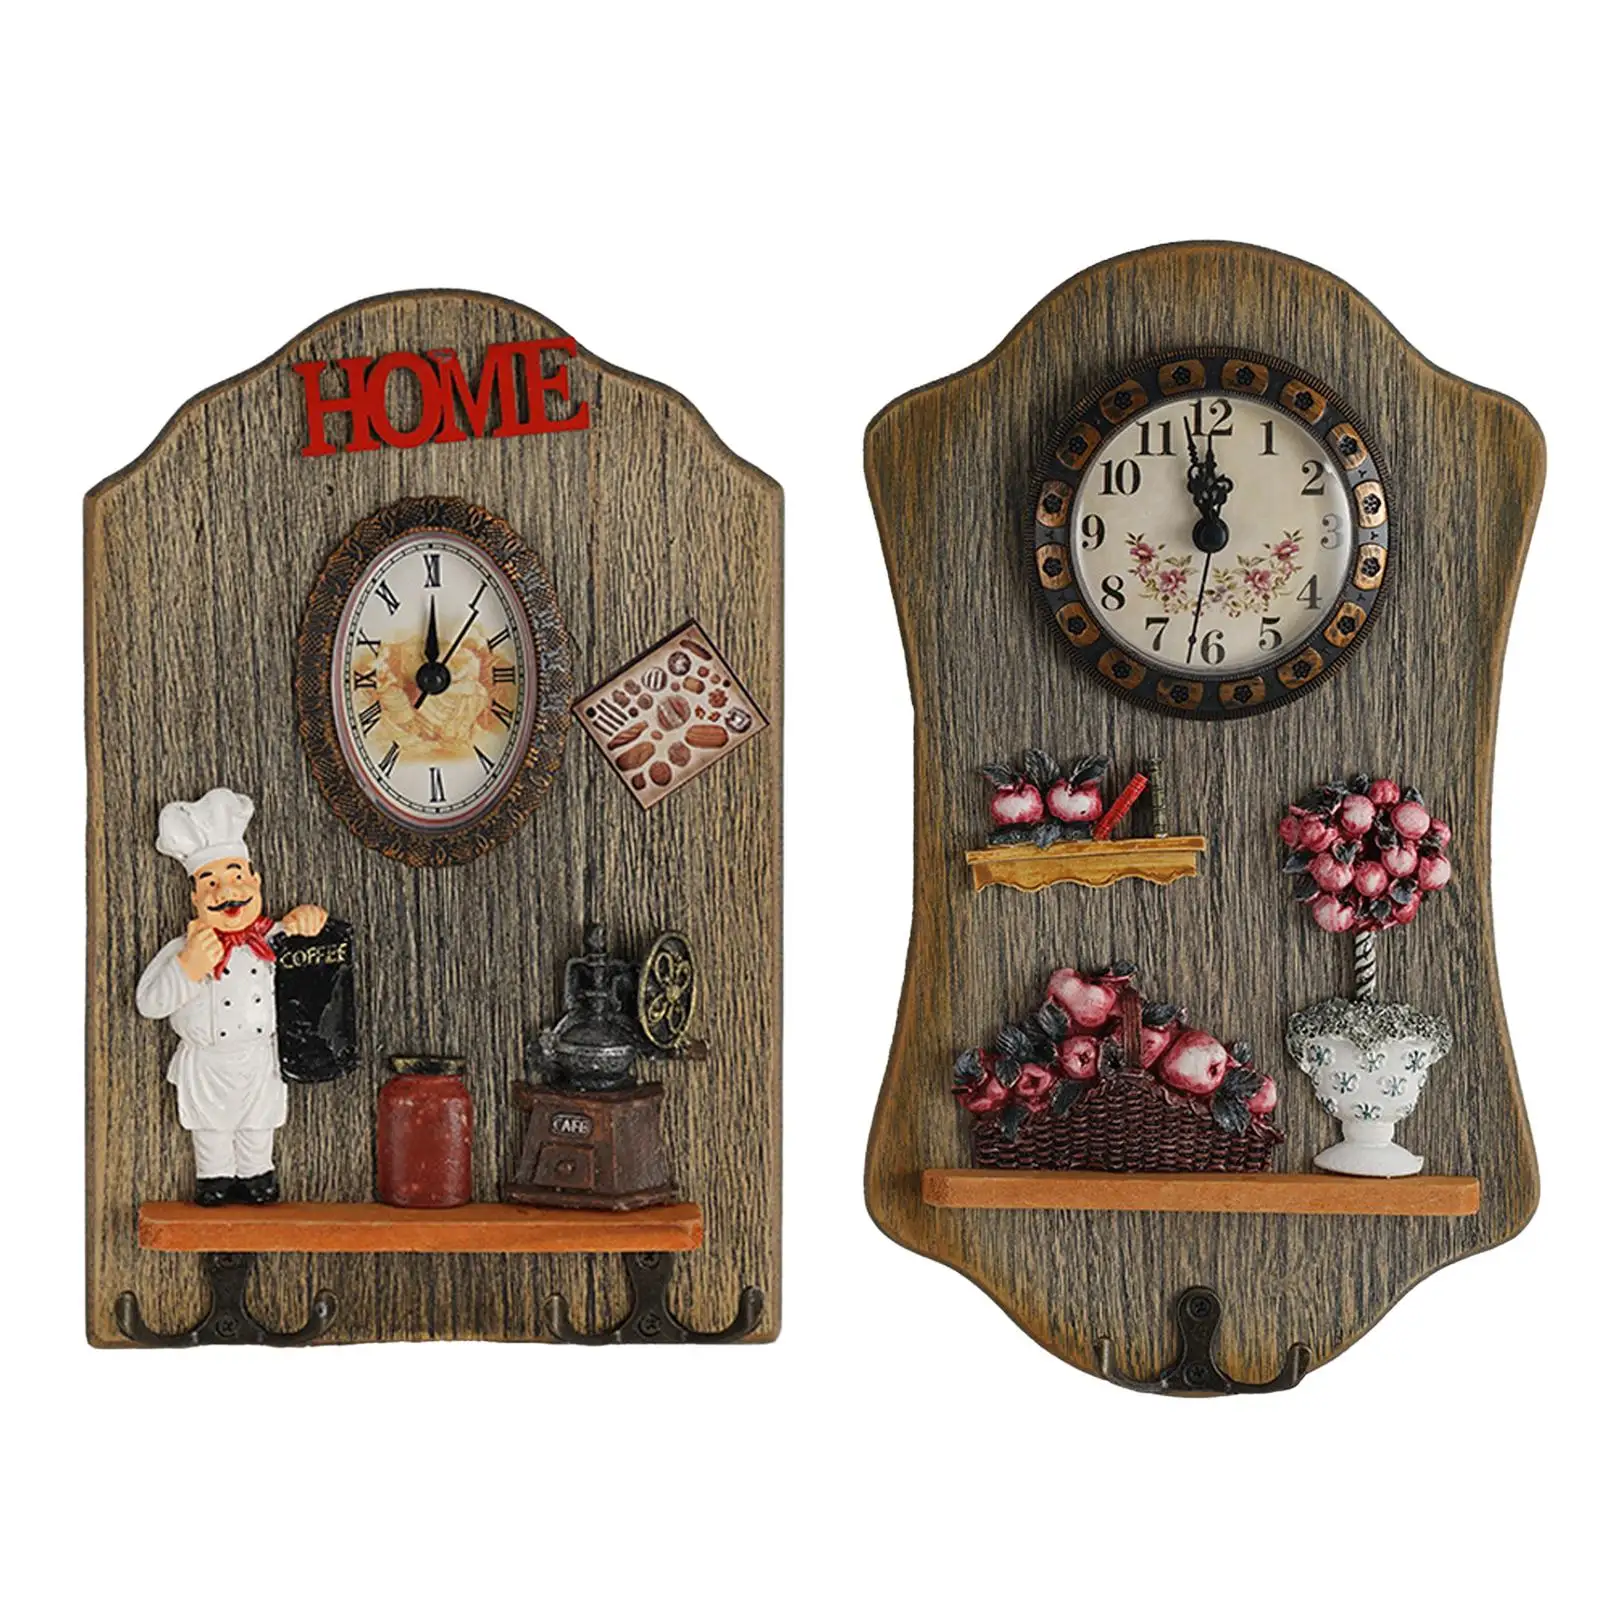 Rustic Wall Clock, Decorative Collectable Hanging Ornament Clocks for Home Kitchen Decor Gift